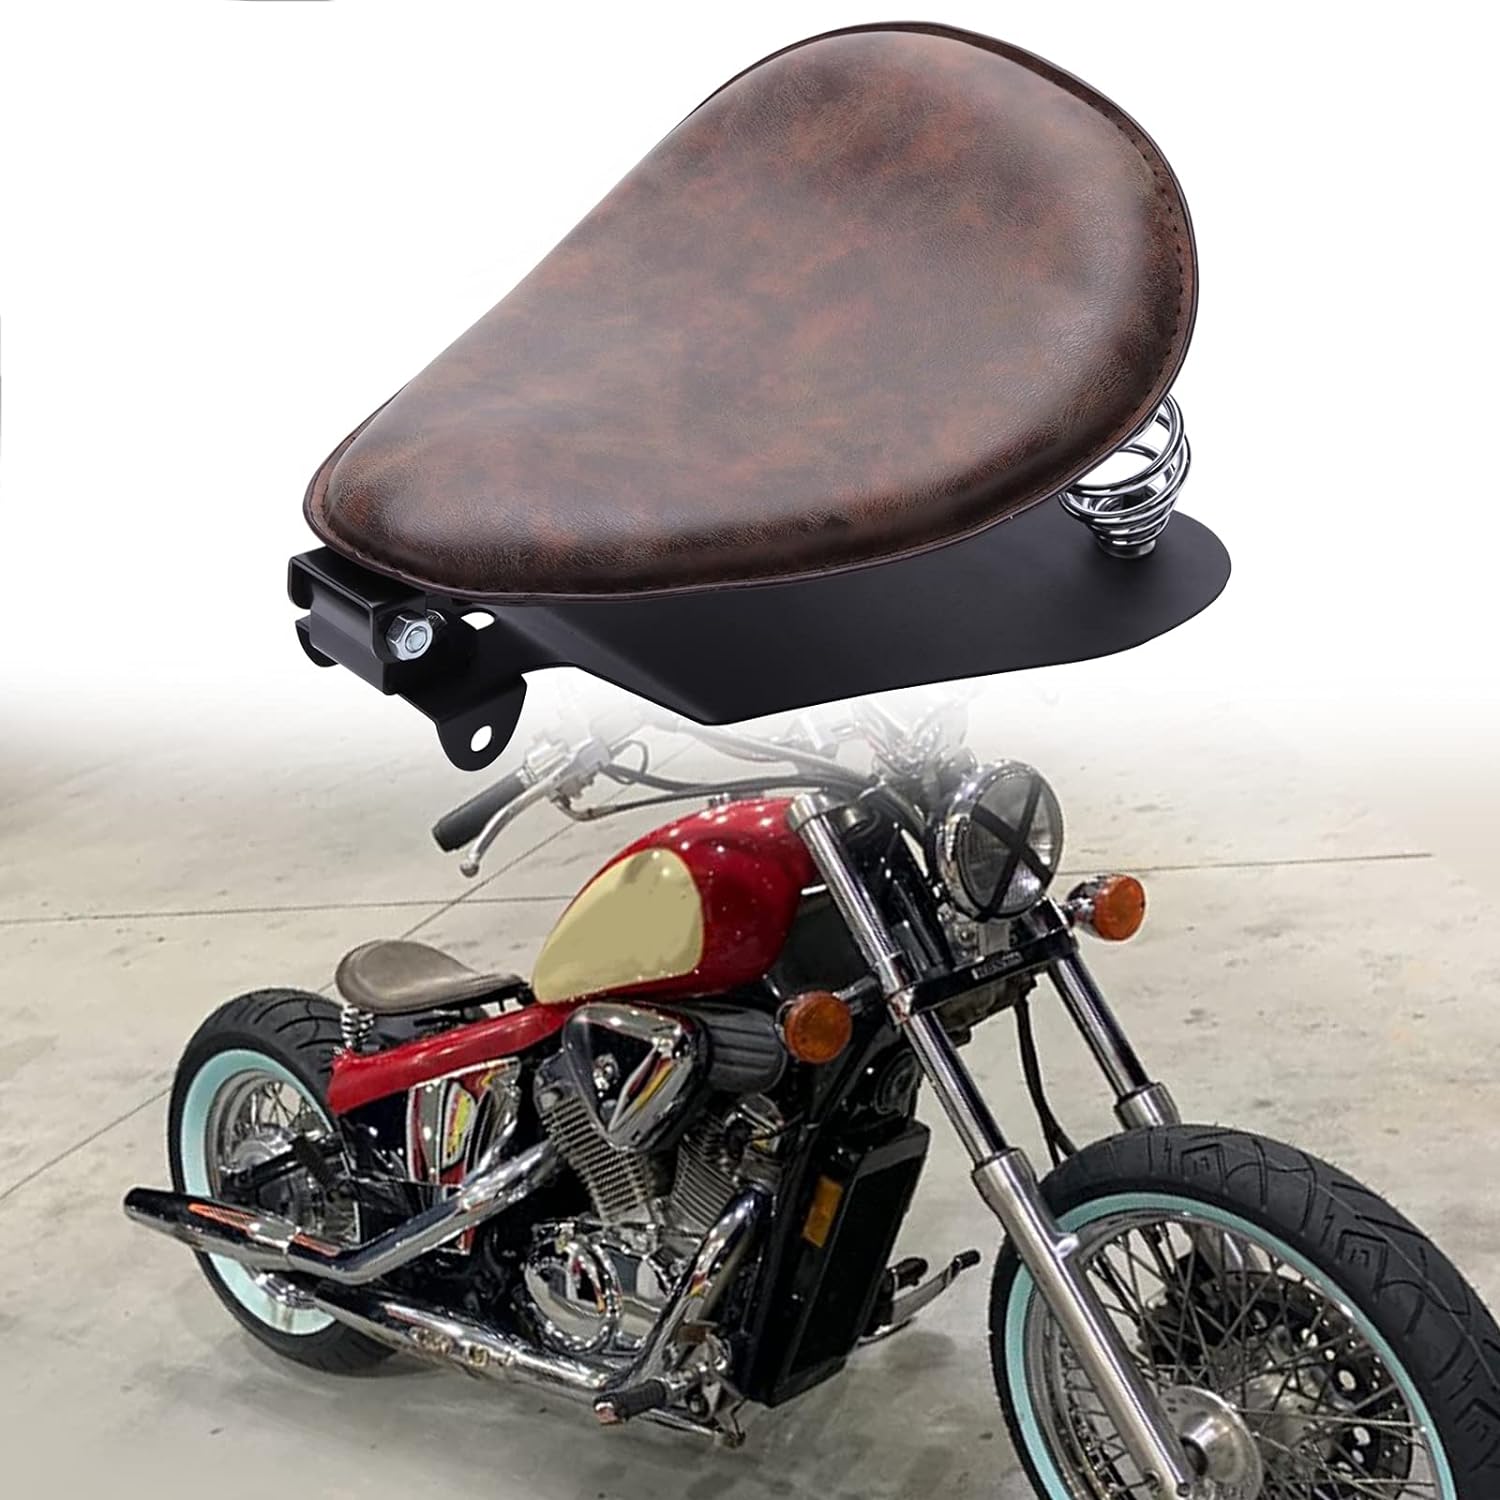 Rich Choices Black Crocodile Leather Solo Seat with Spring Bracket Kit for Harley Davidson Sportster XL 1200 883 48 Chopper Bobber Seats Custom - Rich Choices Crocodile Leather Seat Review